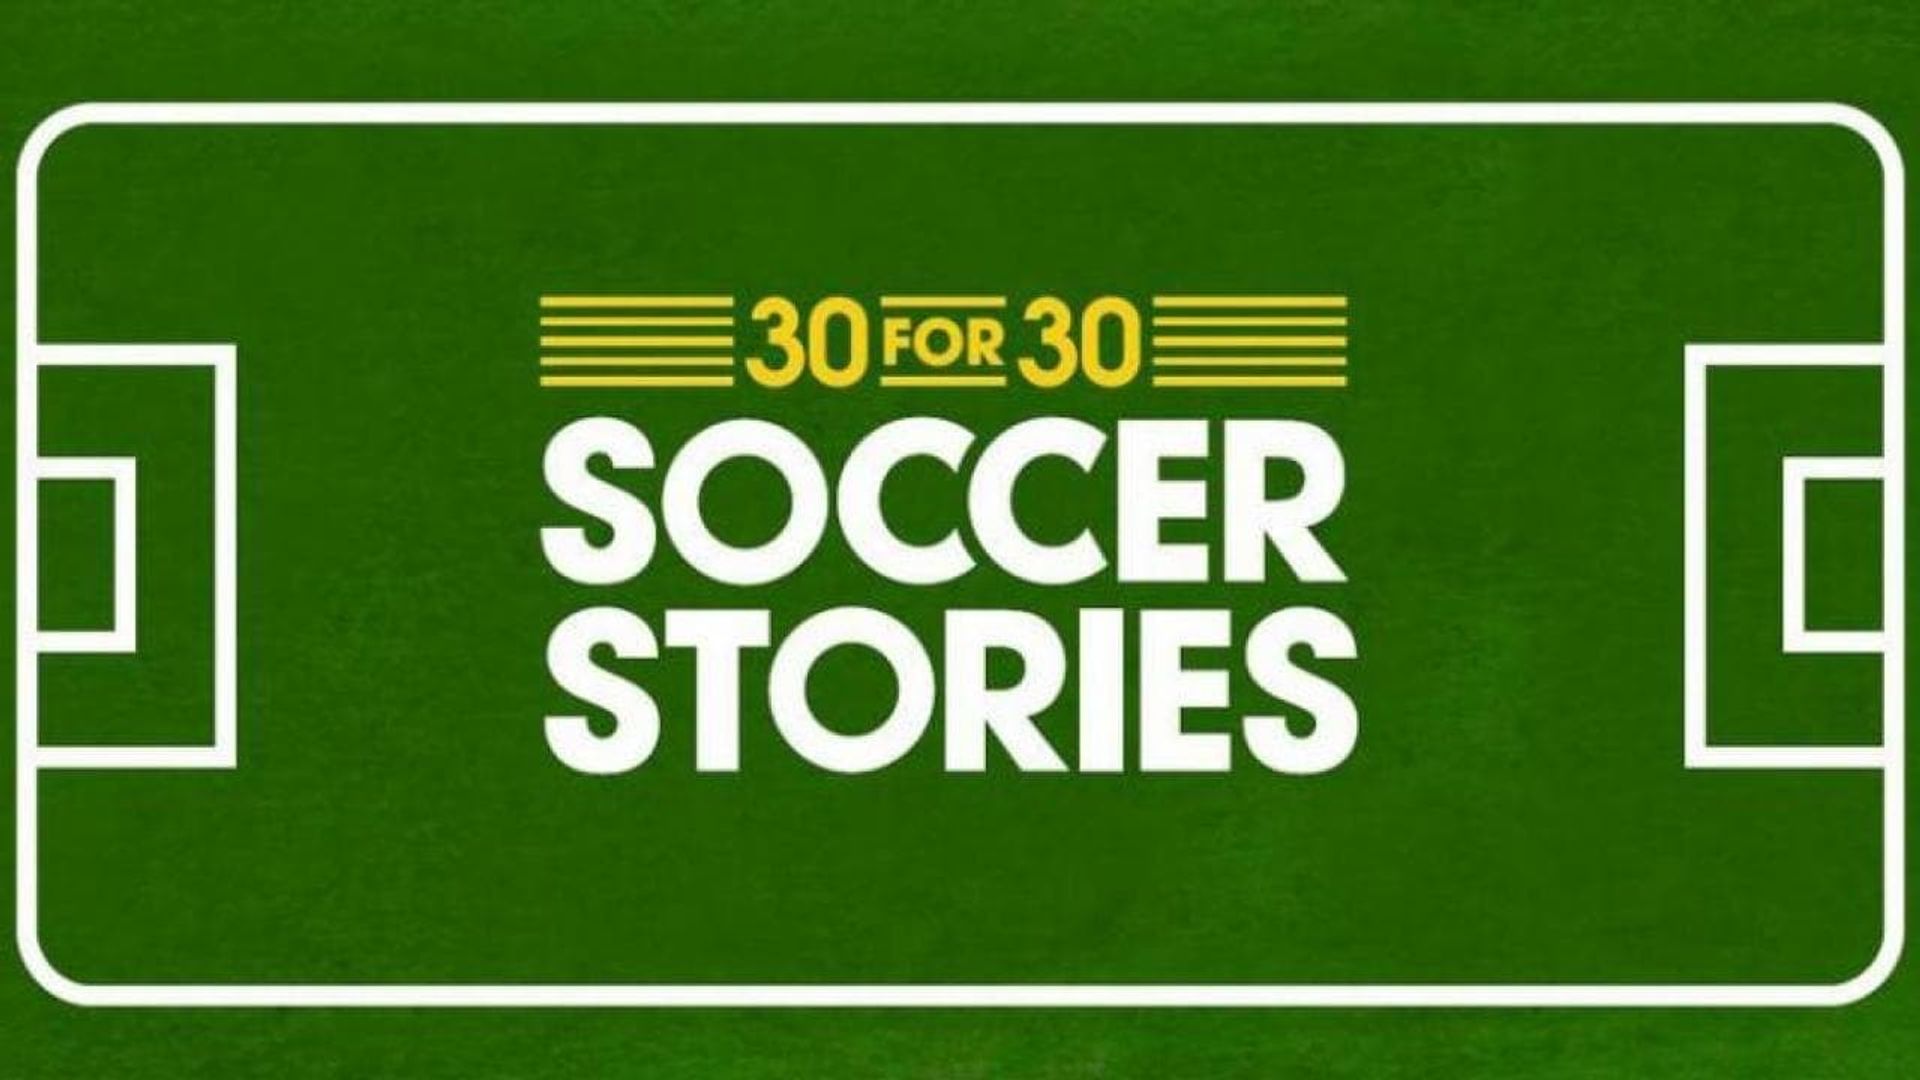 30 for 30: Soccer Stories background